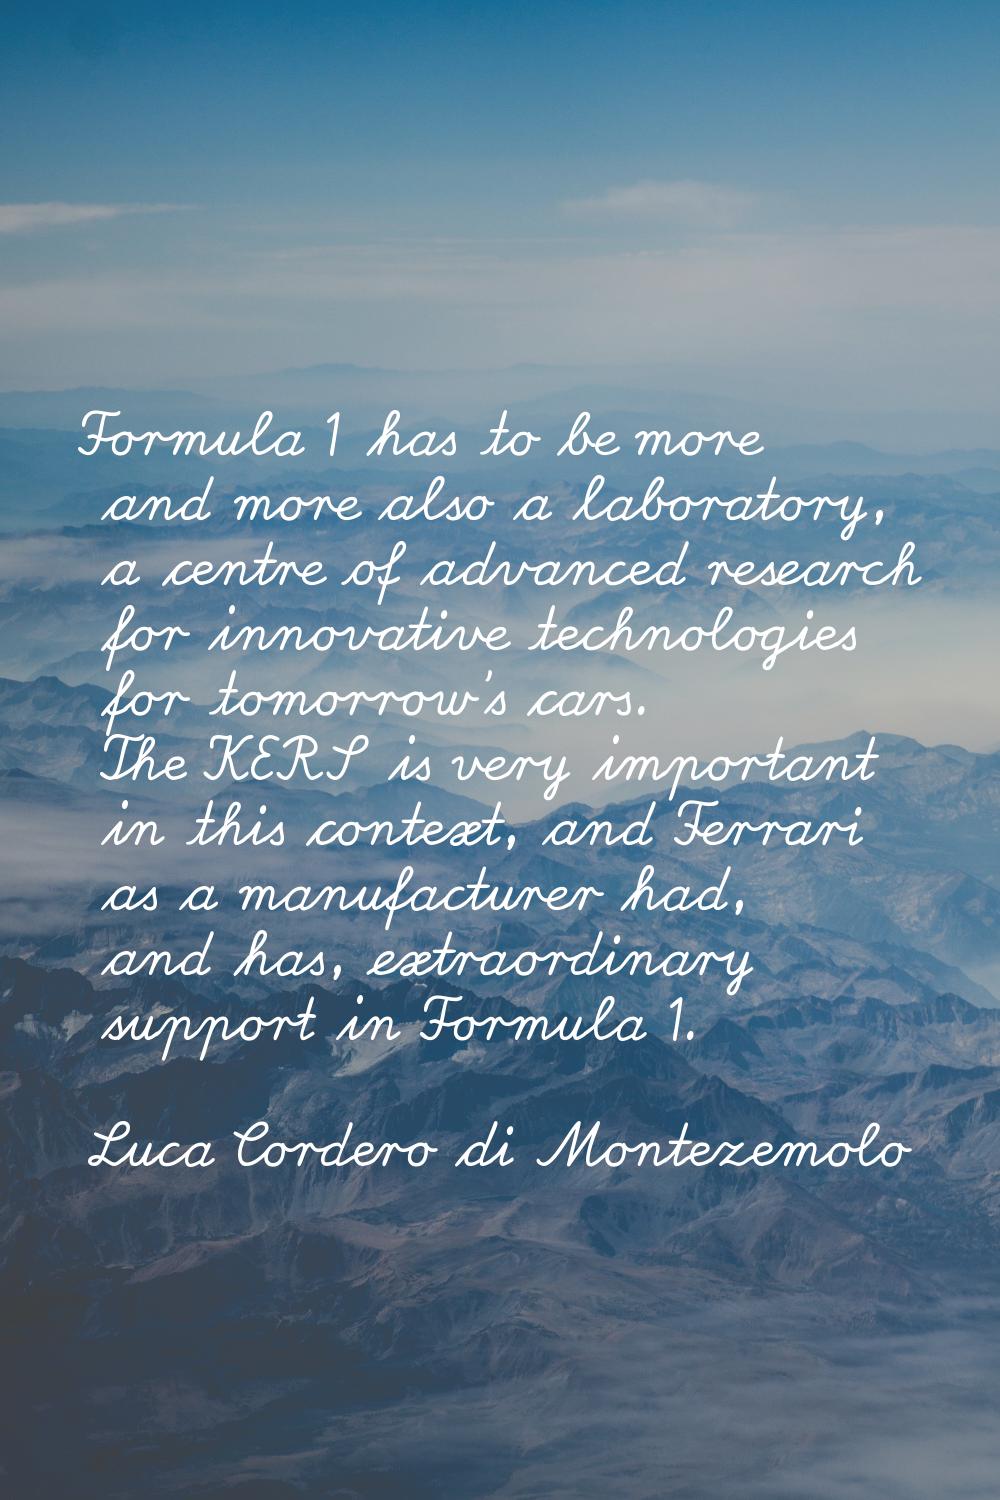 Formula 1 has to be more and more also a laboratory, a centre of advanced research for innovative t